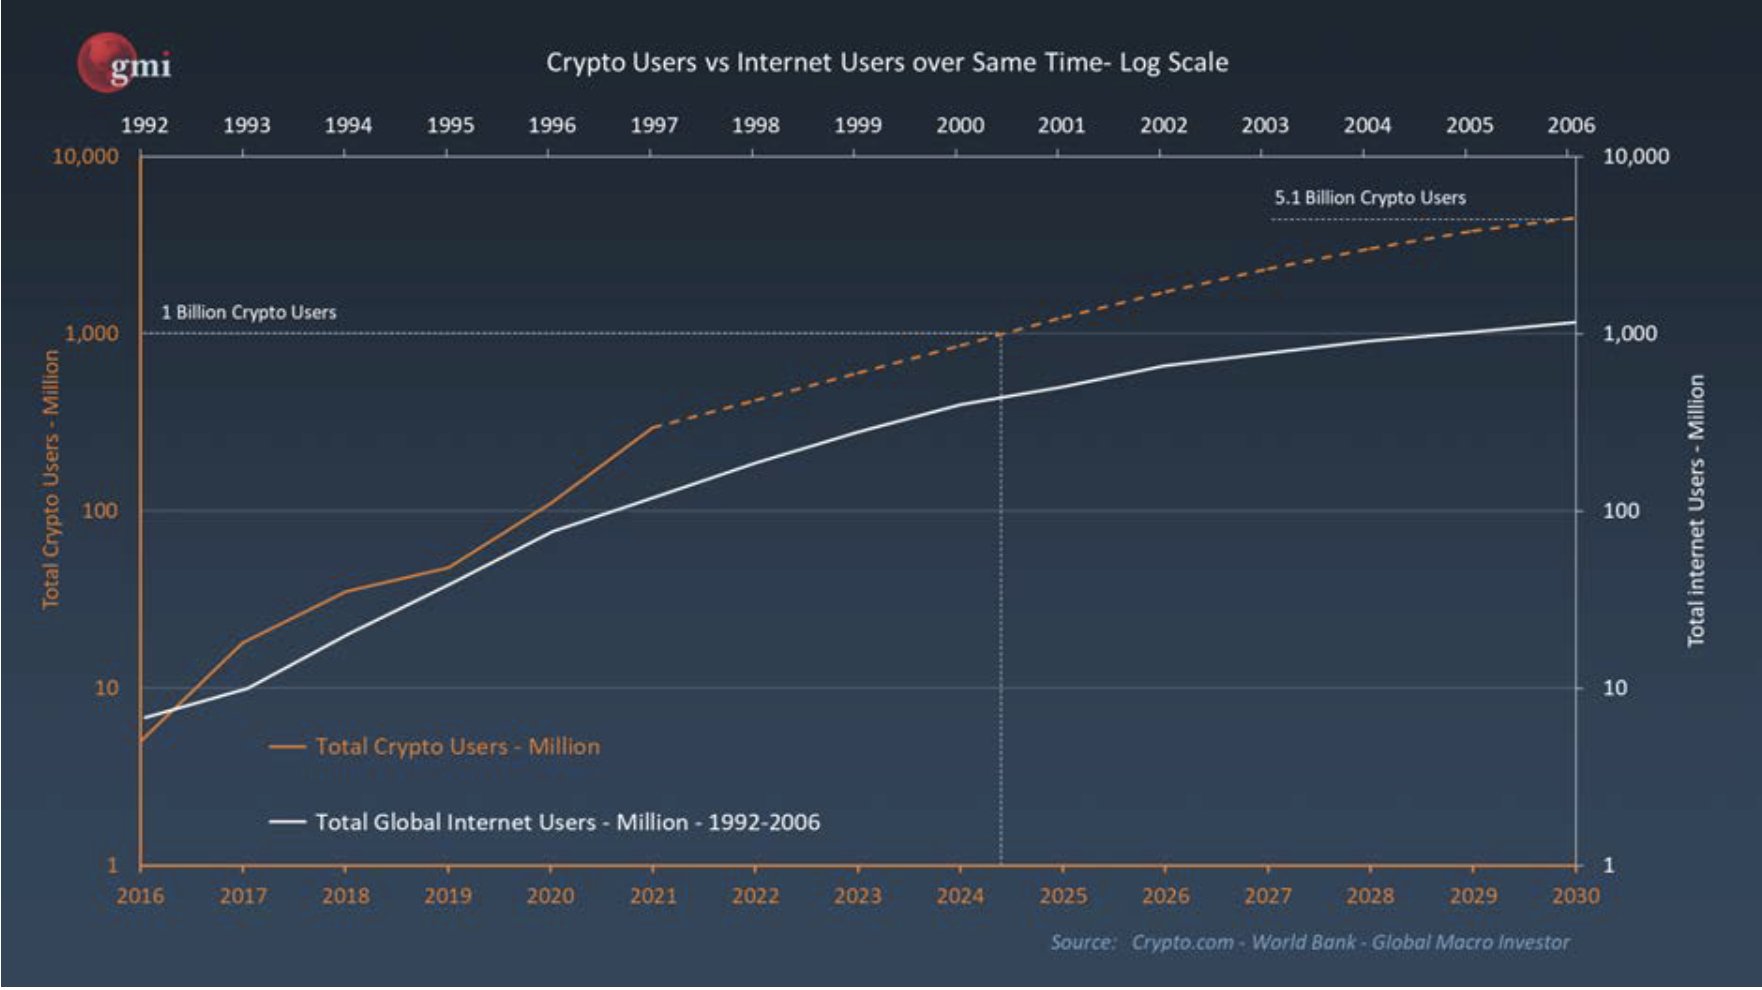 Graph showing the technology adoption curve for cryptocurrencies and the internet 